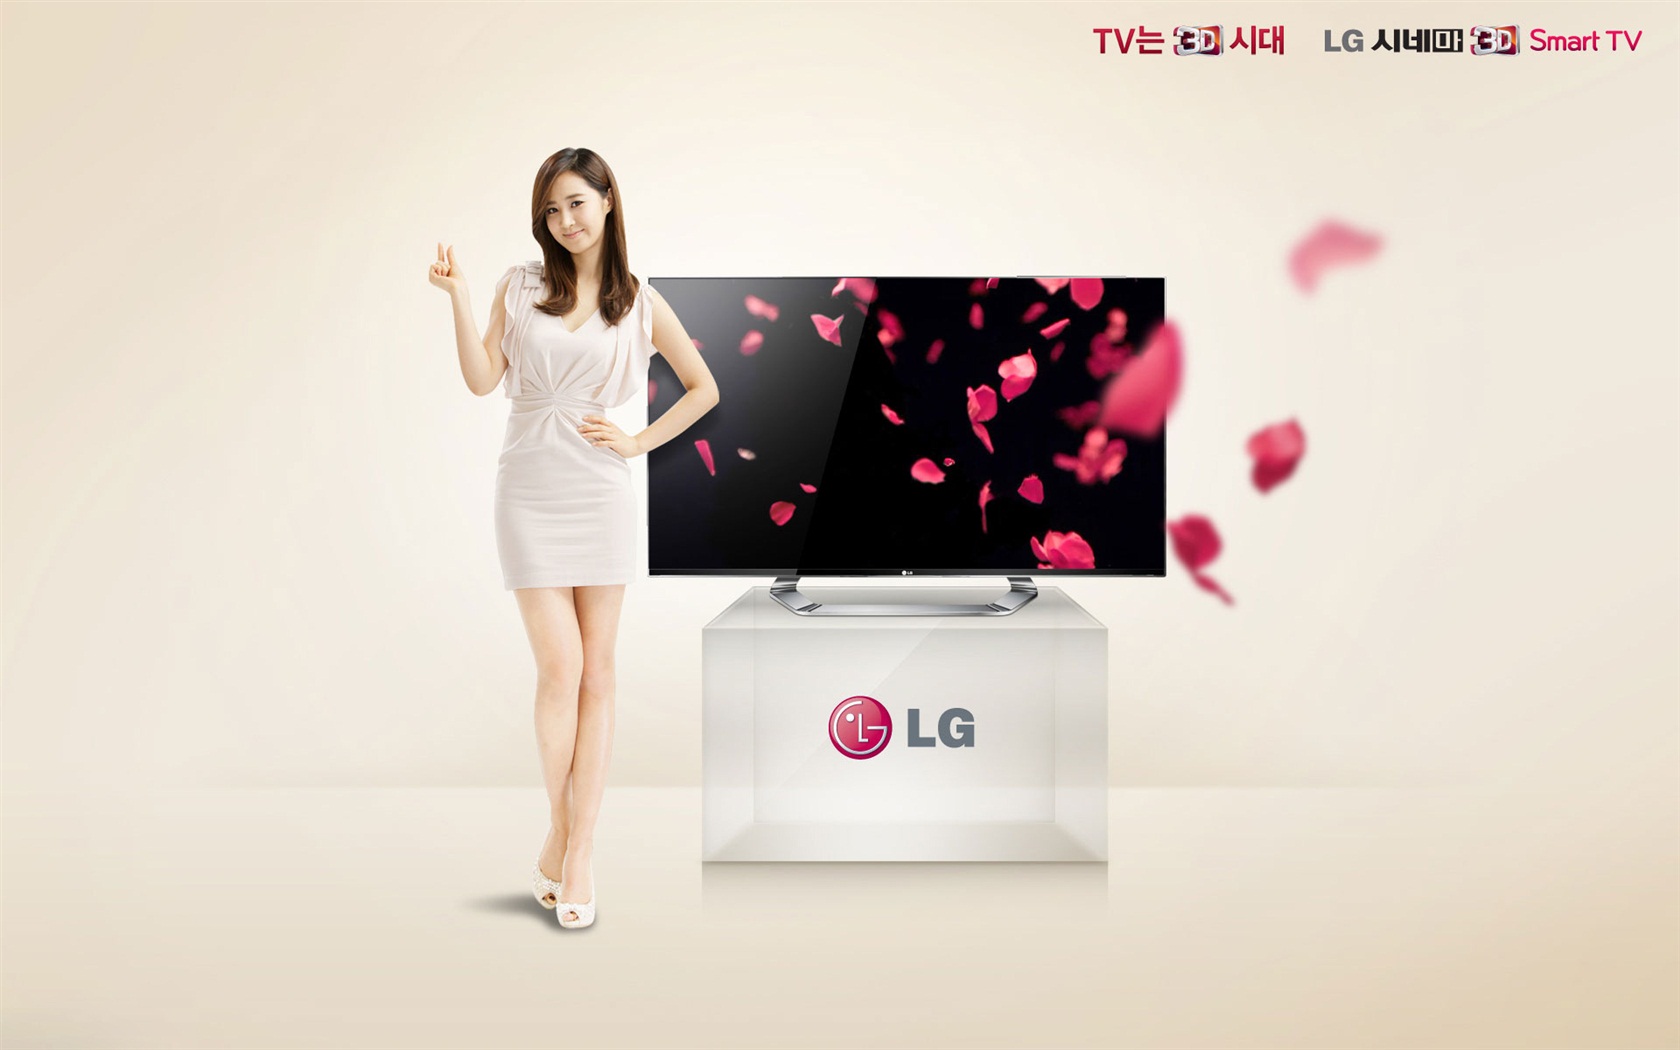 Girls Generation ACE and LG endorsements ads HD wallpapers #17 - 1680x1050